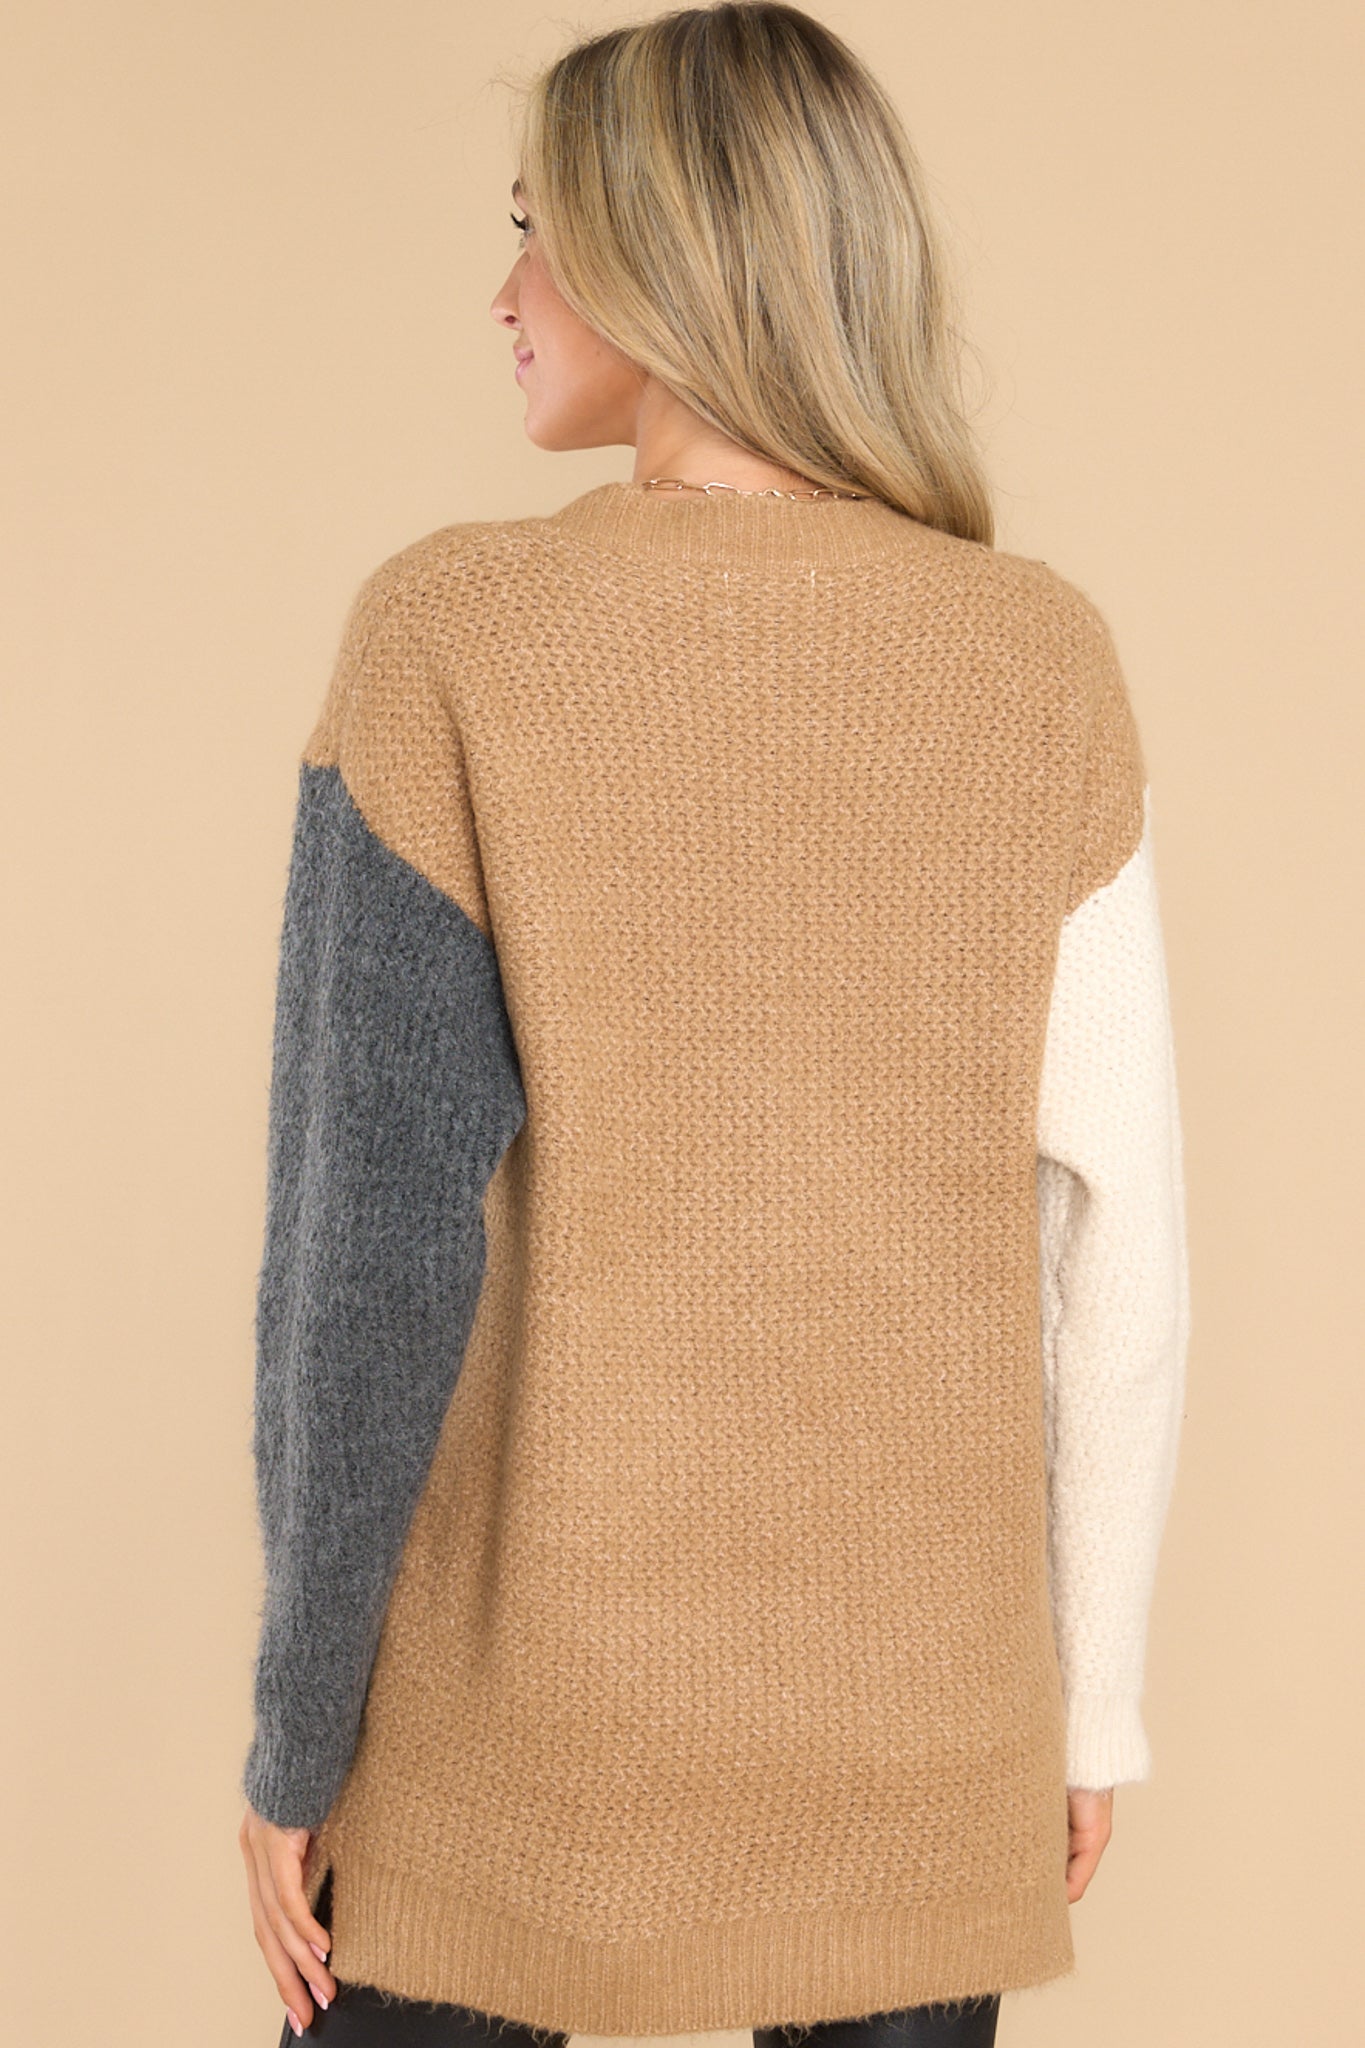 Back view of this sweater that features a v-neckline, color block design, and an oversized fit.